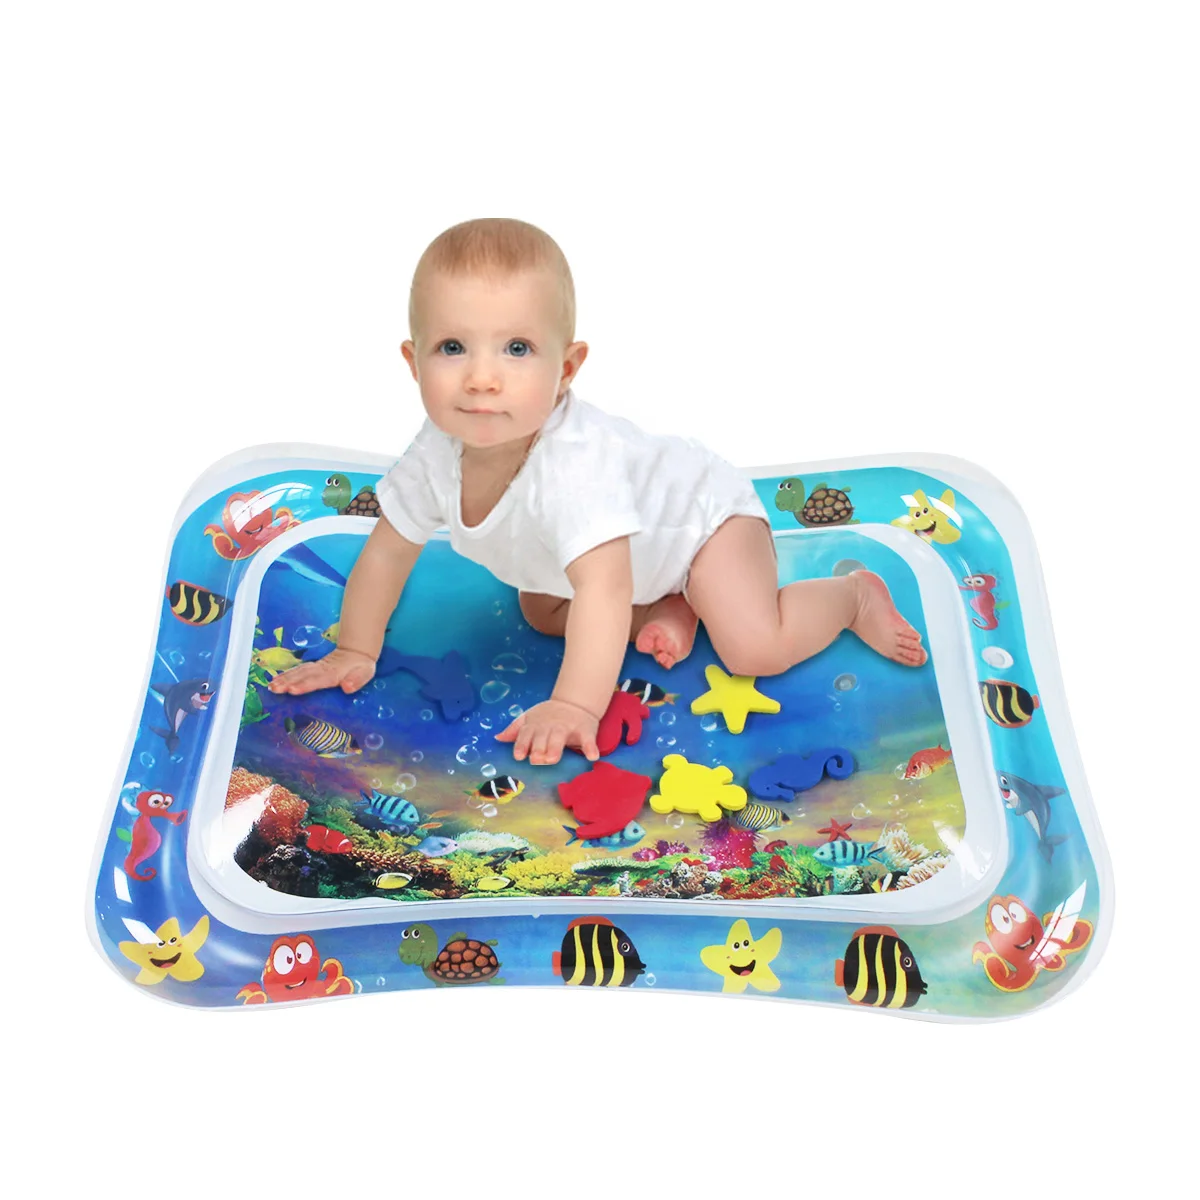 Large Inflatable Water Play Mat Infants Baby Toddlers Kid Perfect Fun Tummy Time 